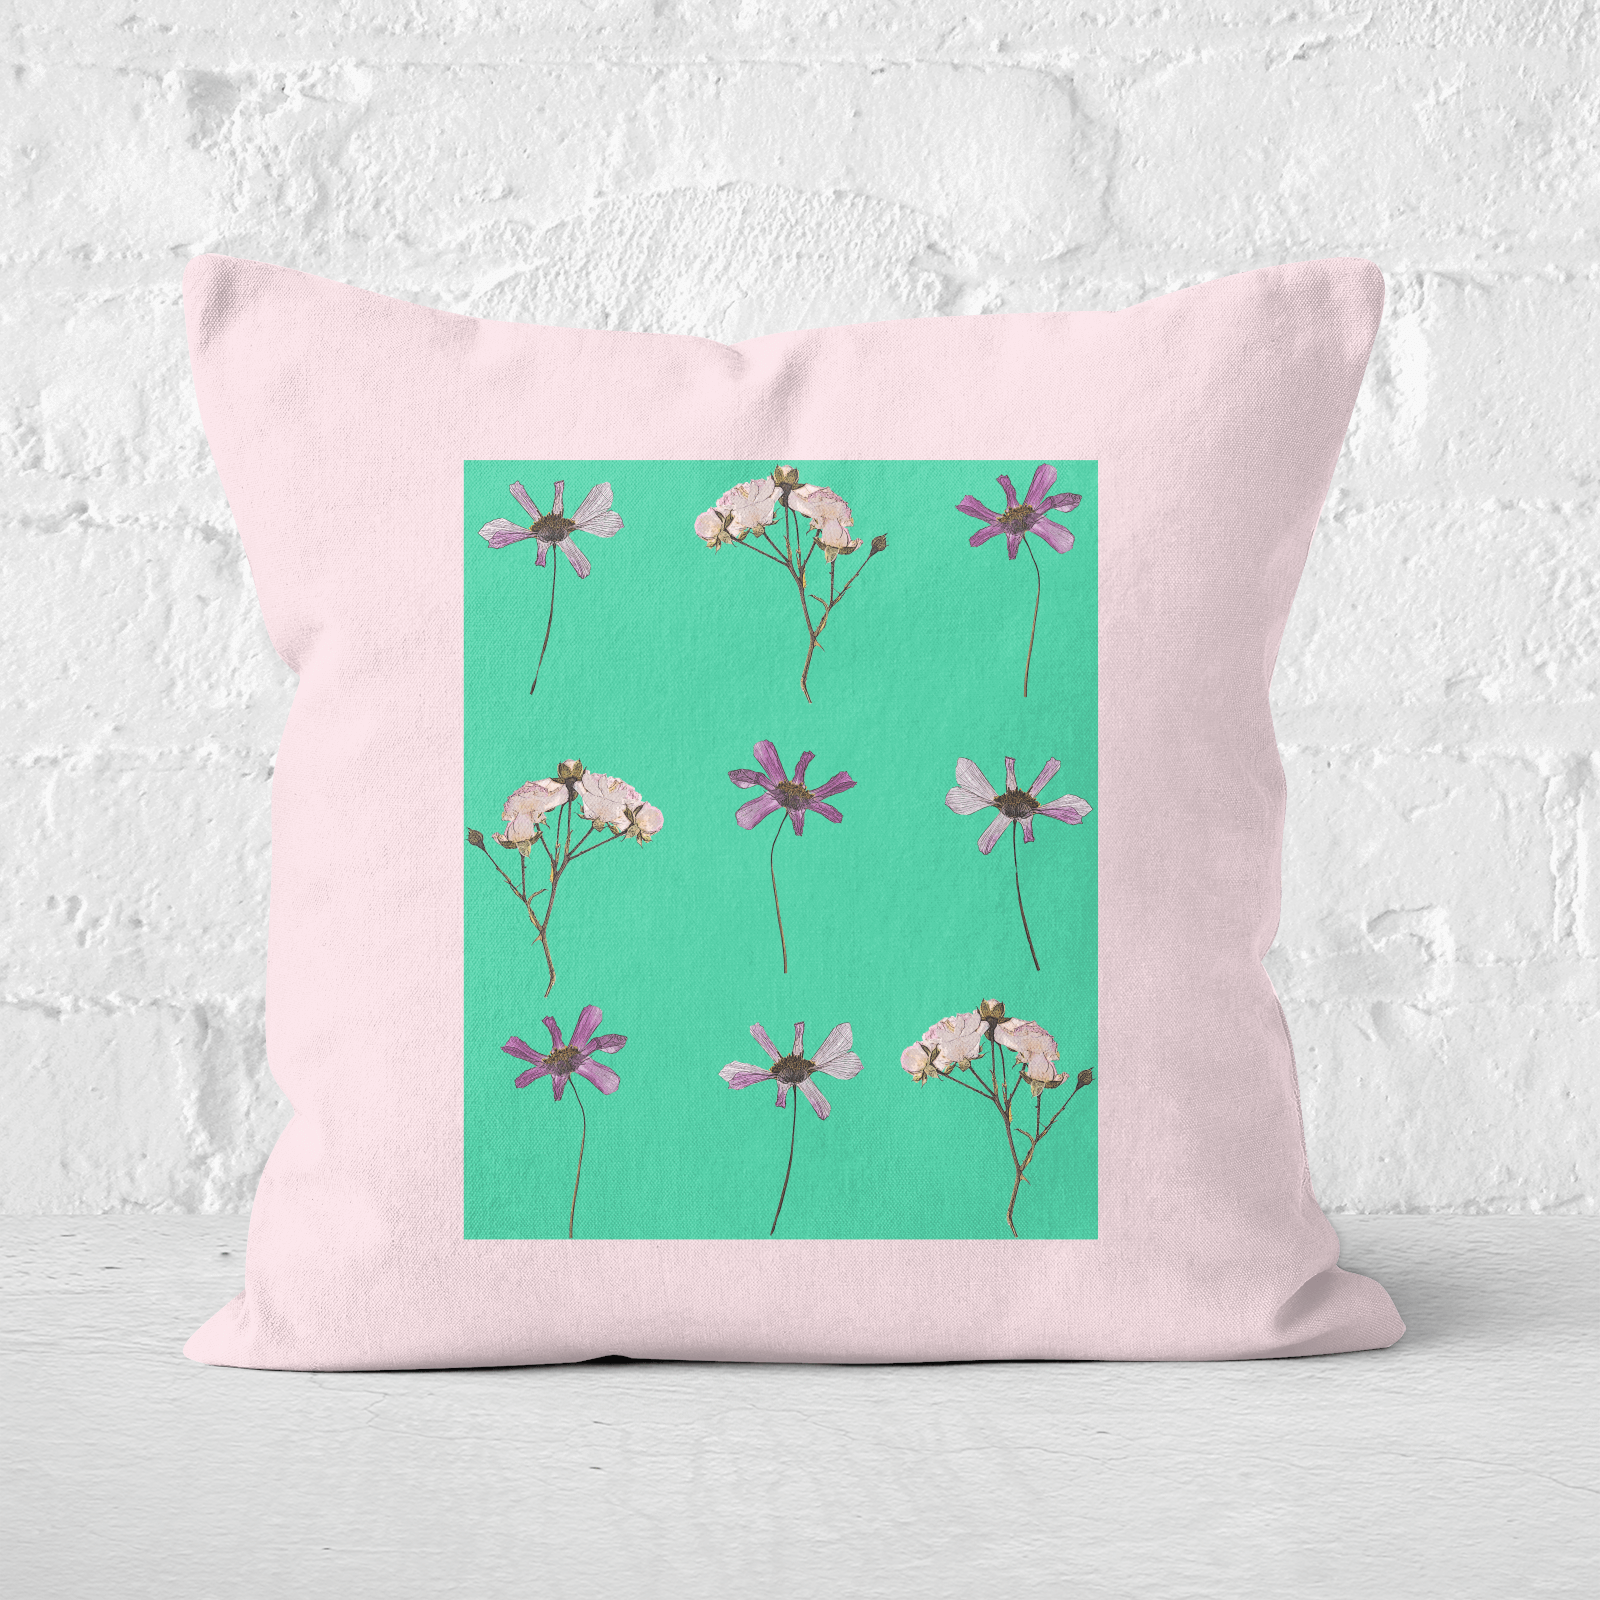 Pressed Flowers Natural Tone Trio Flowers Square Cushion - 60x60cm - Soft Touch